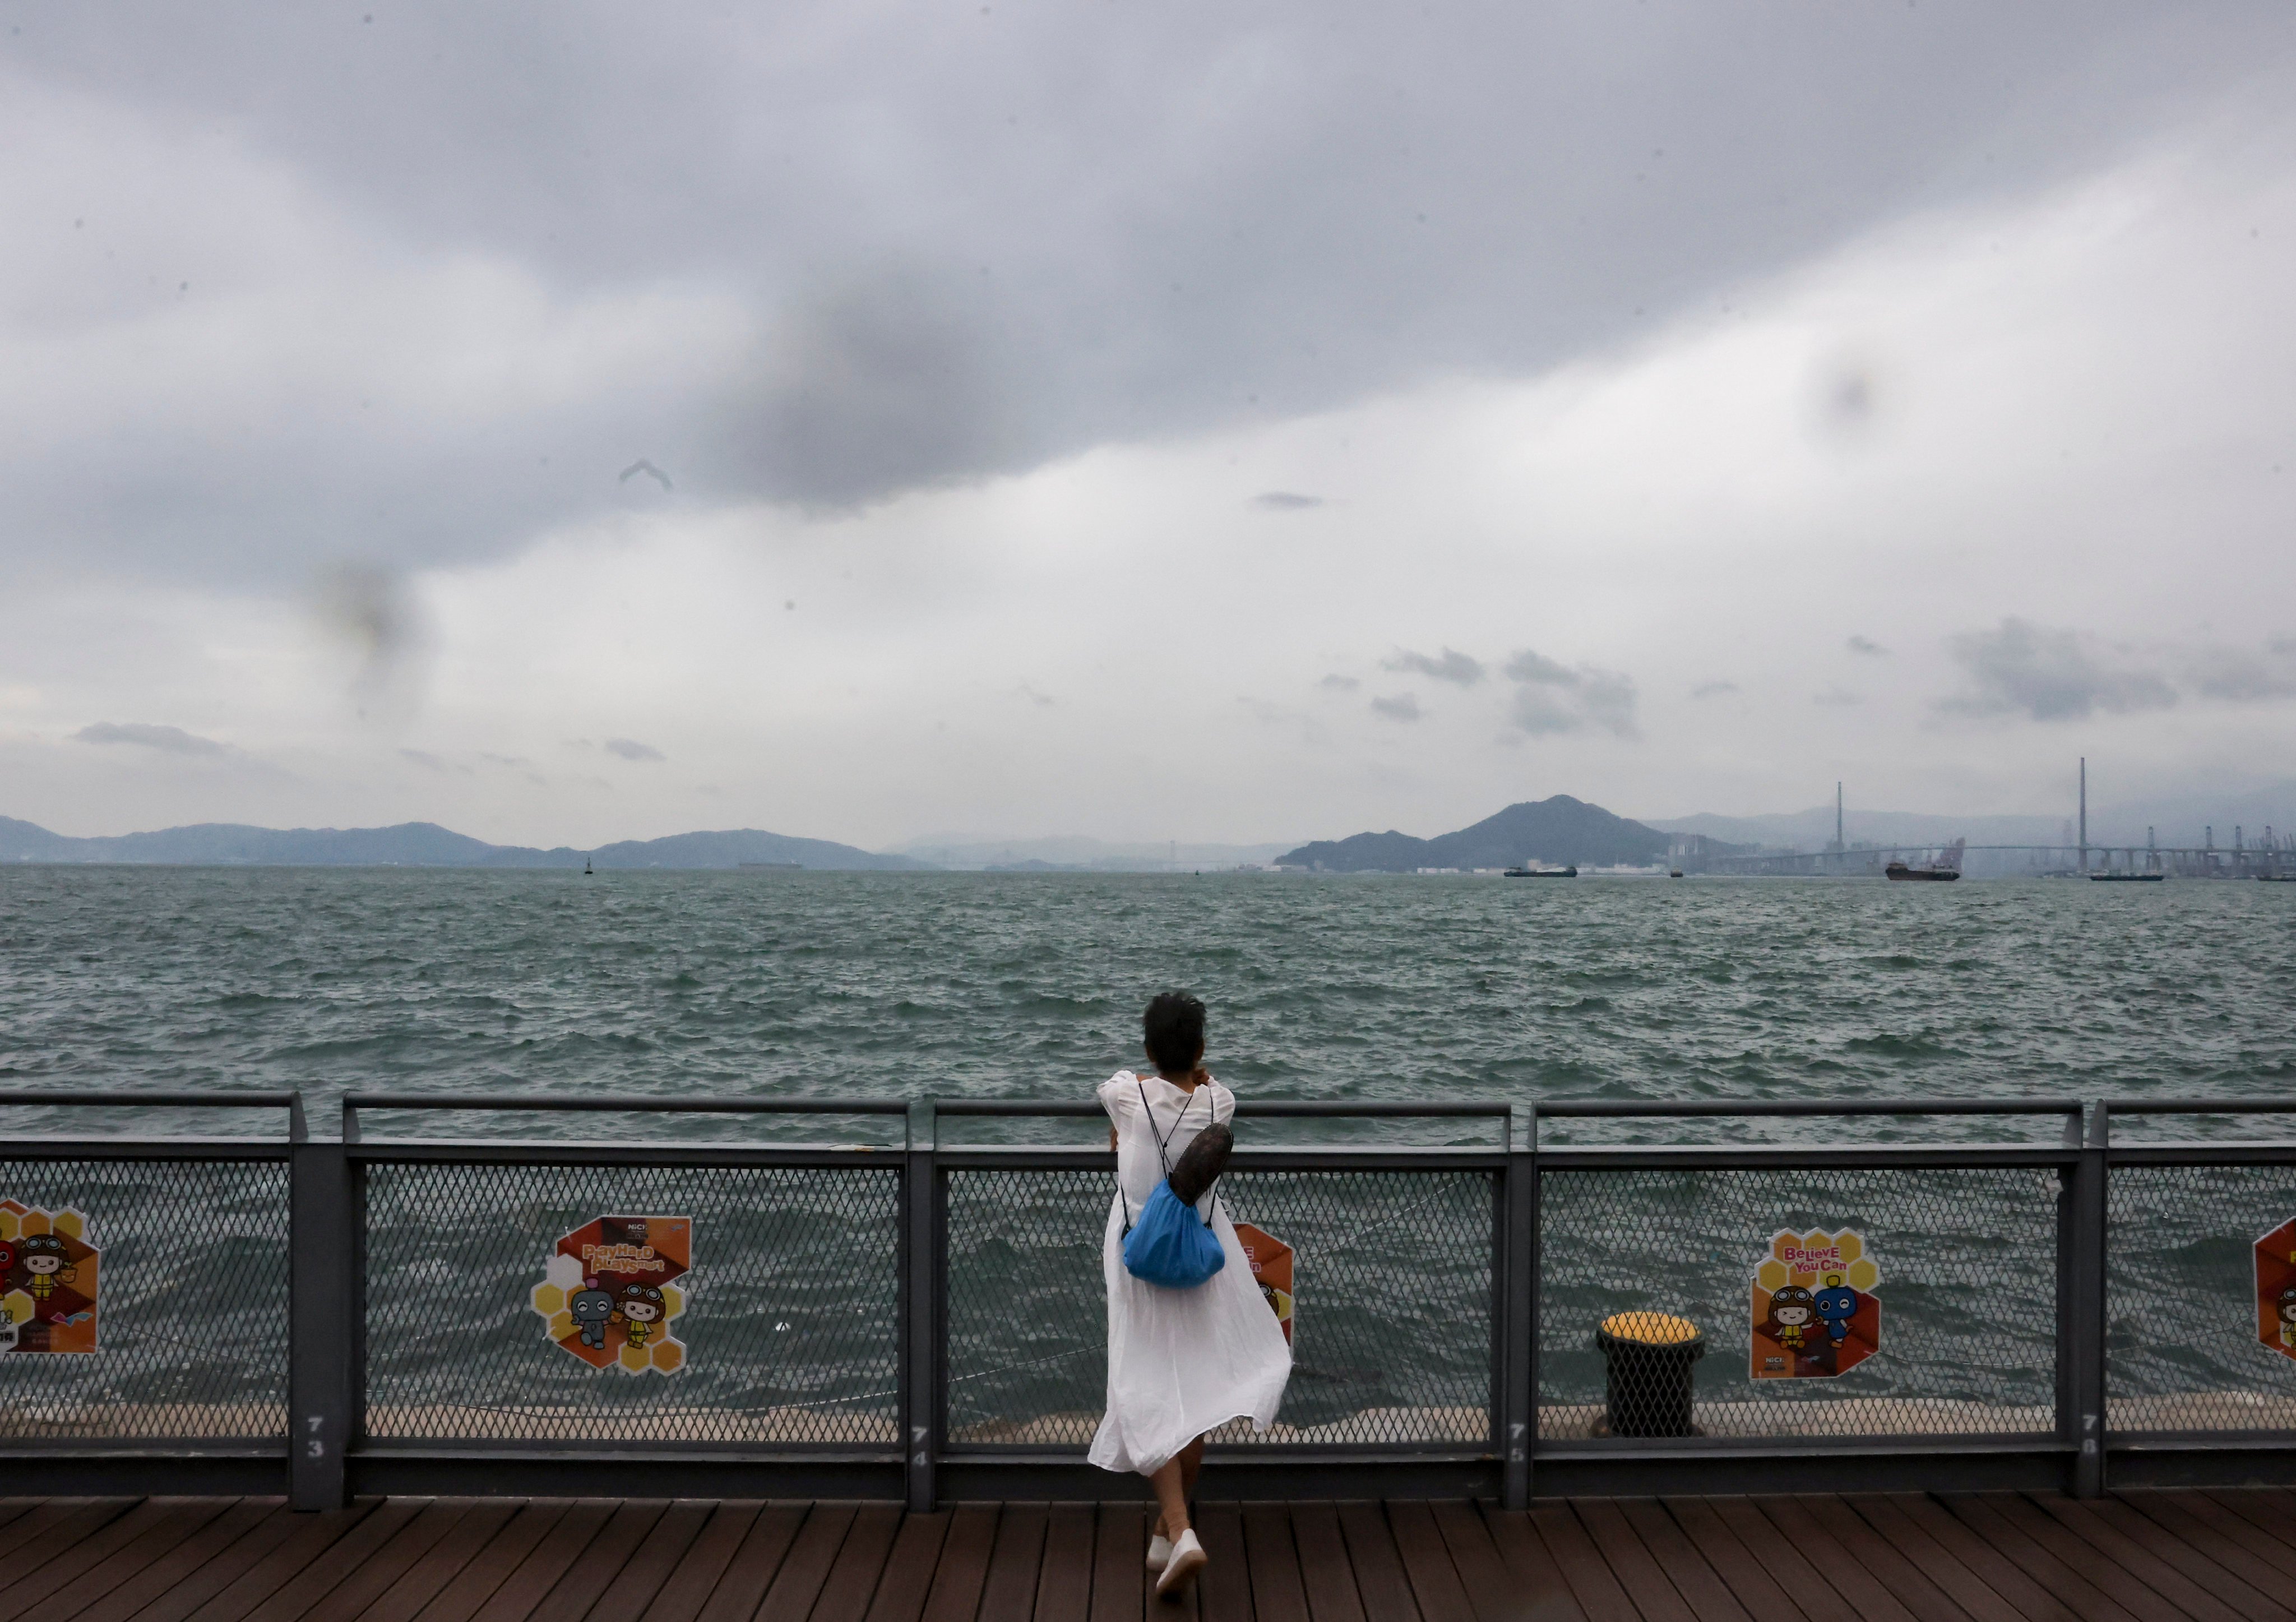 A resident watches the water rise near Belcher Bay Promenade in Kennedy Town as Super Typhoon Saola approaches Hong Kong. Photo: Jonathan Wong